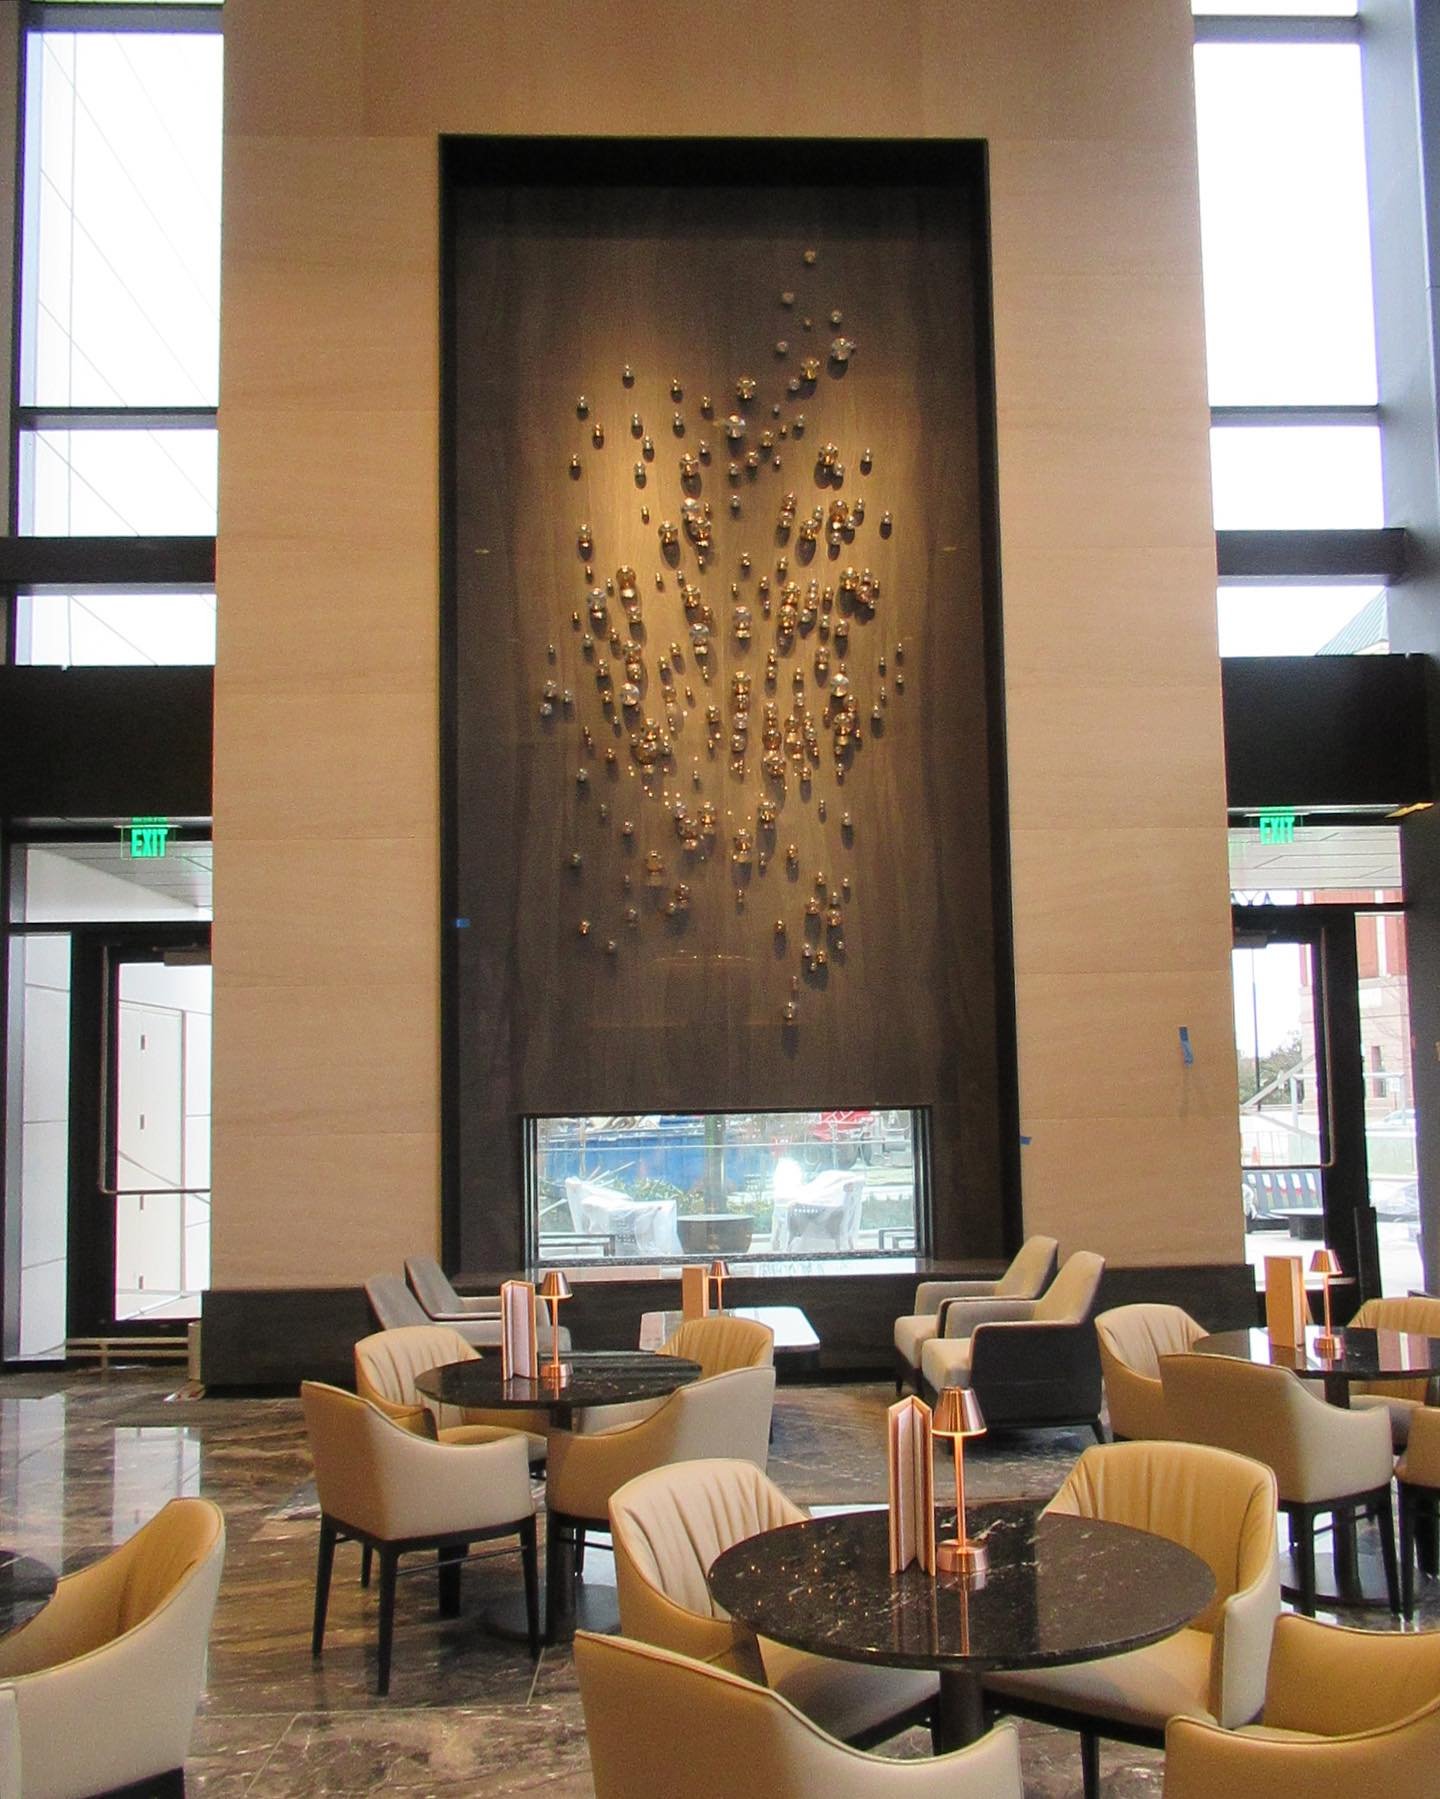 Did someone say feature walls? These two jaw-dropping wall installation are part of Local Language&rsquo;s bespoke art collection for Loews Arlington (@loewsarlington)

#art #artconsultant #arlington #hospitalitydesign #hospitality